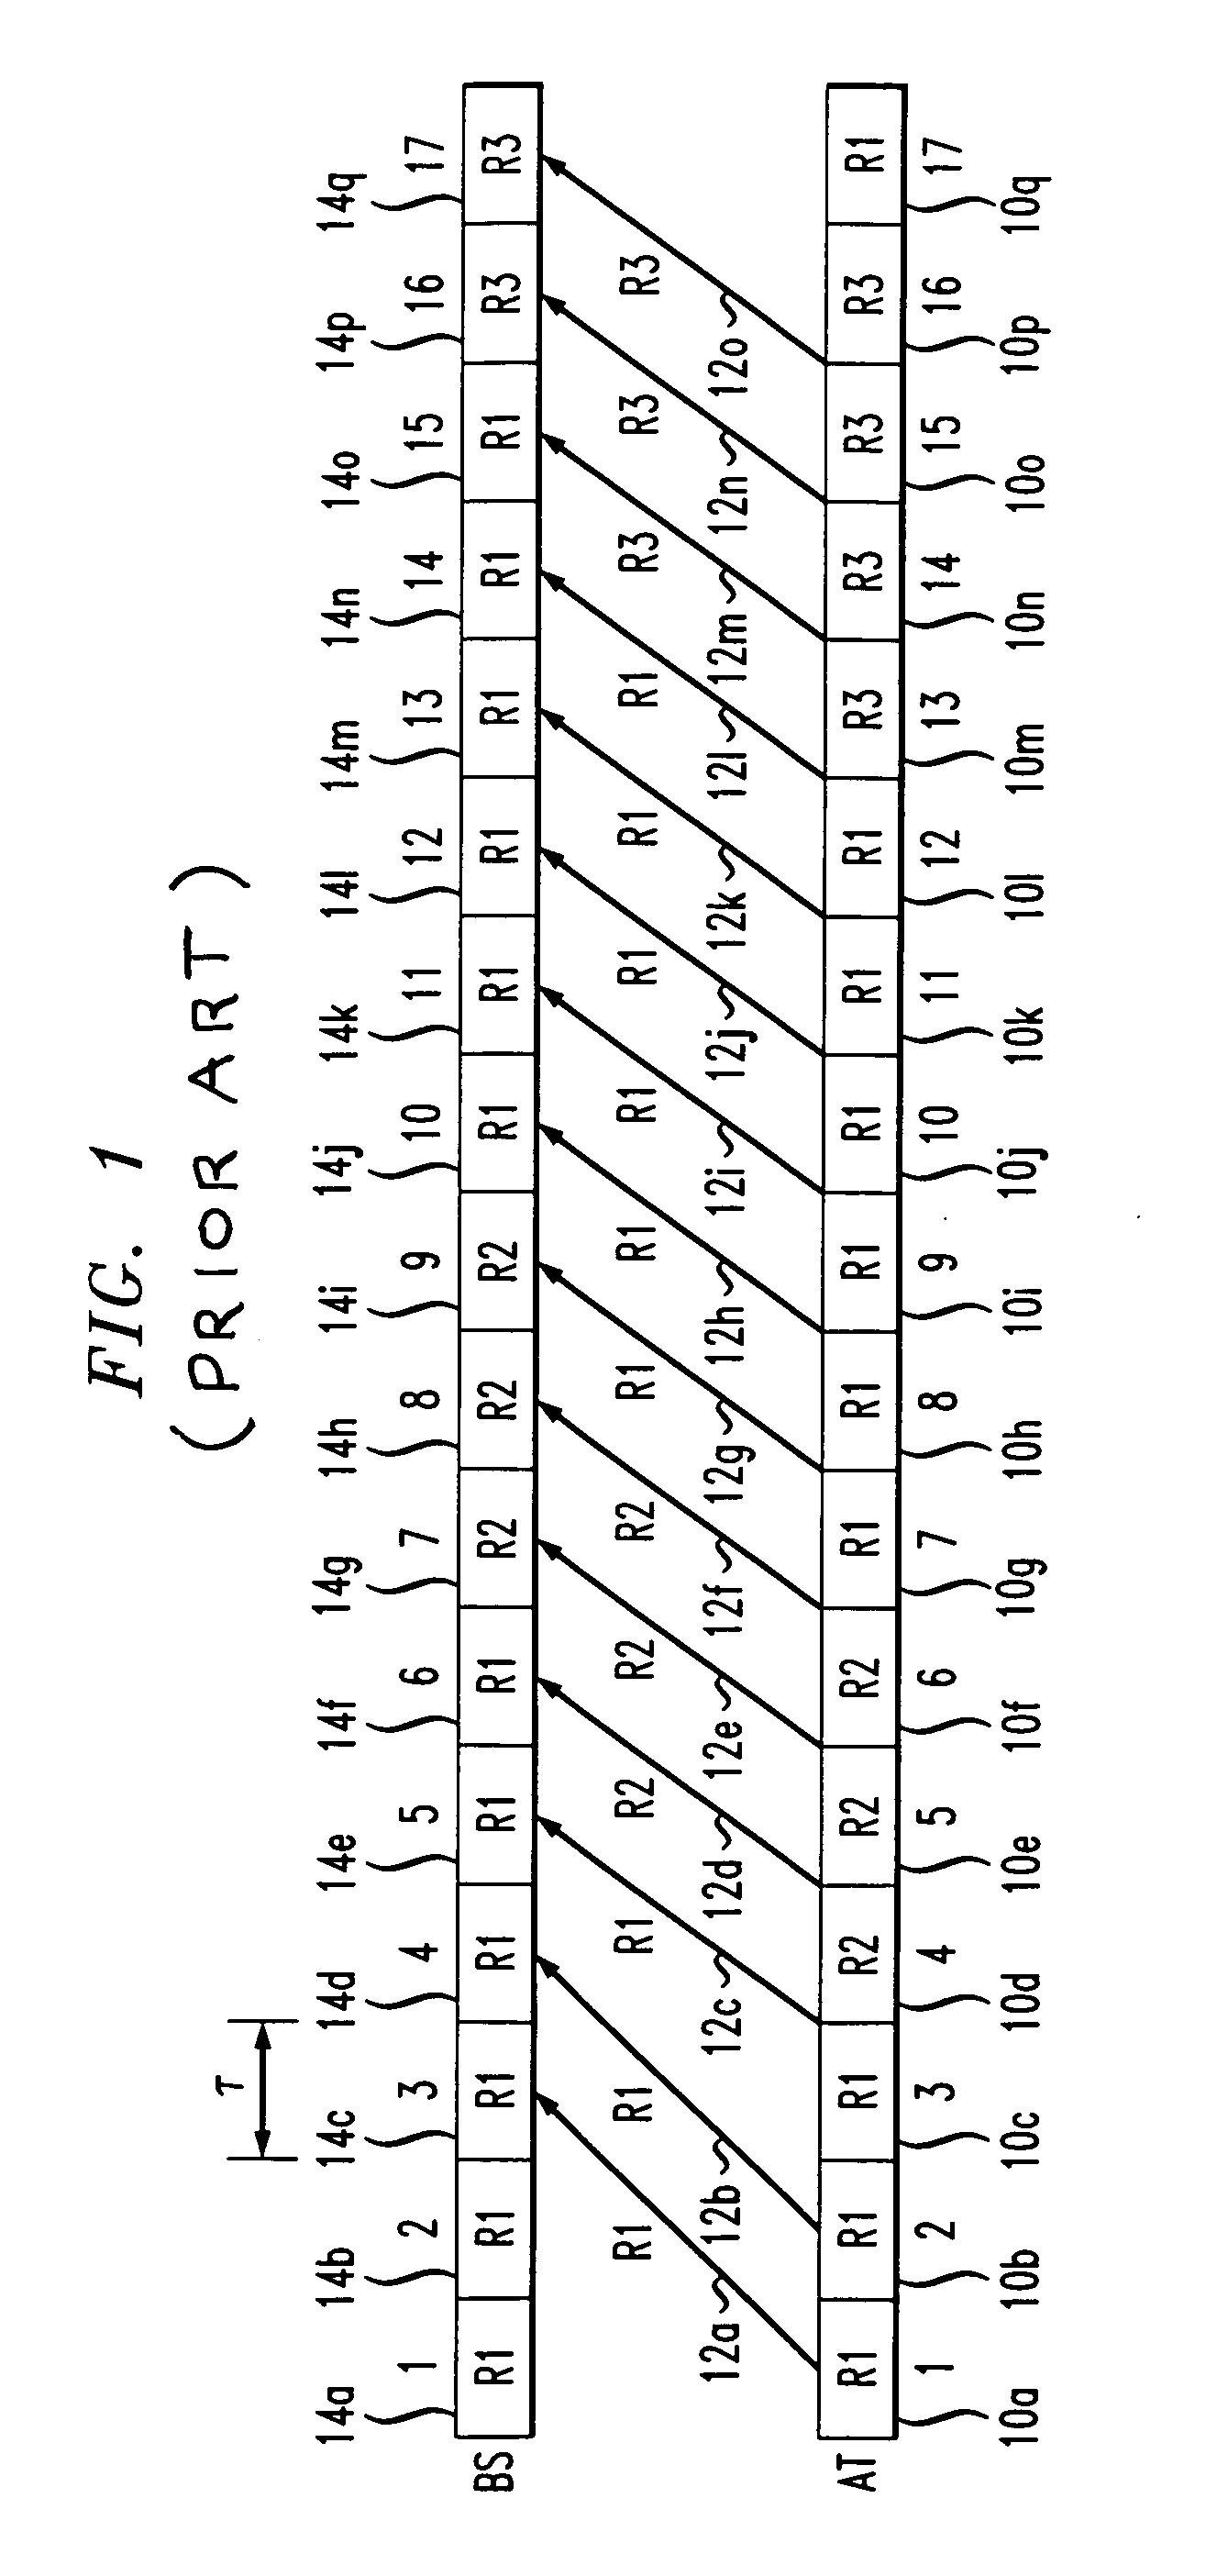 Asymmetric rate feedback and adjustment system for wireless communications